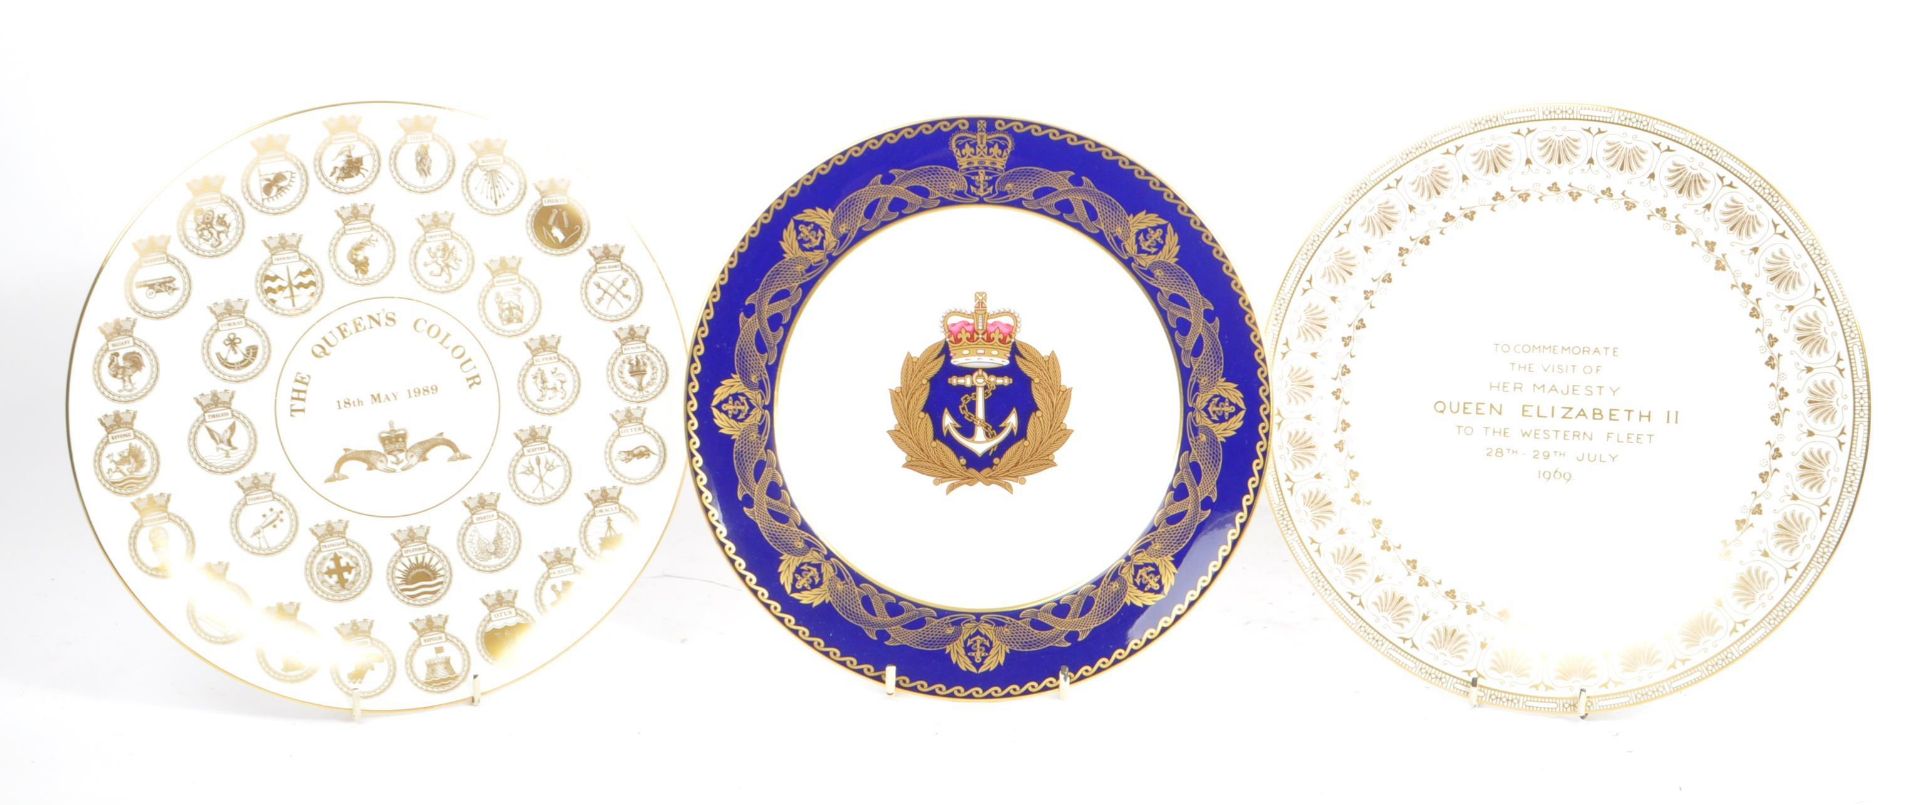 COLLECTION OF THREE PORCELAIN COMMEMORATIVE DISPLAY PLATES